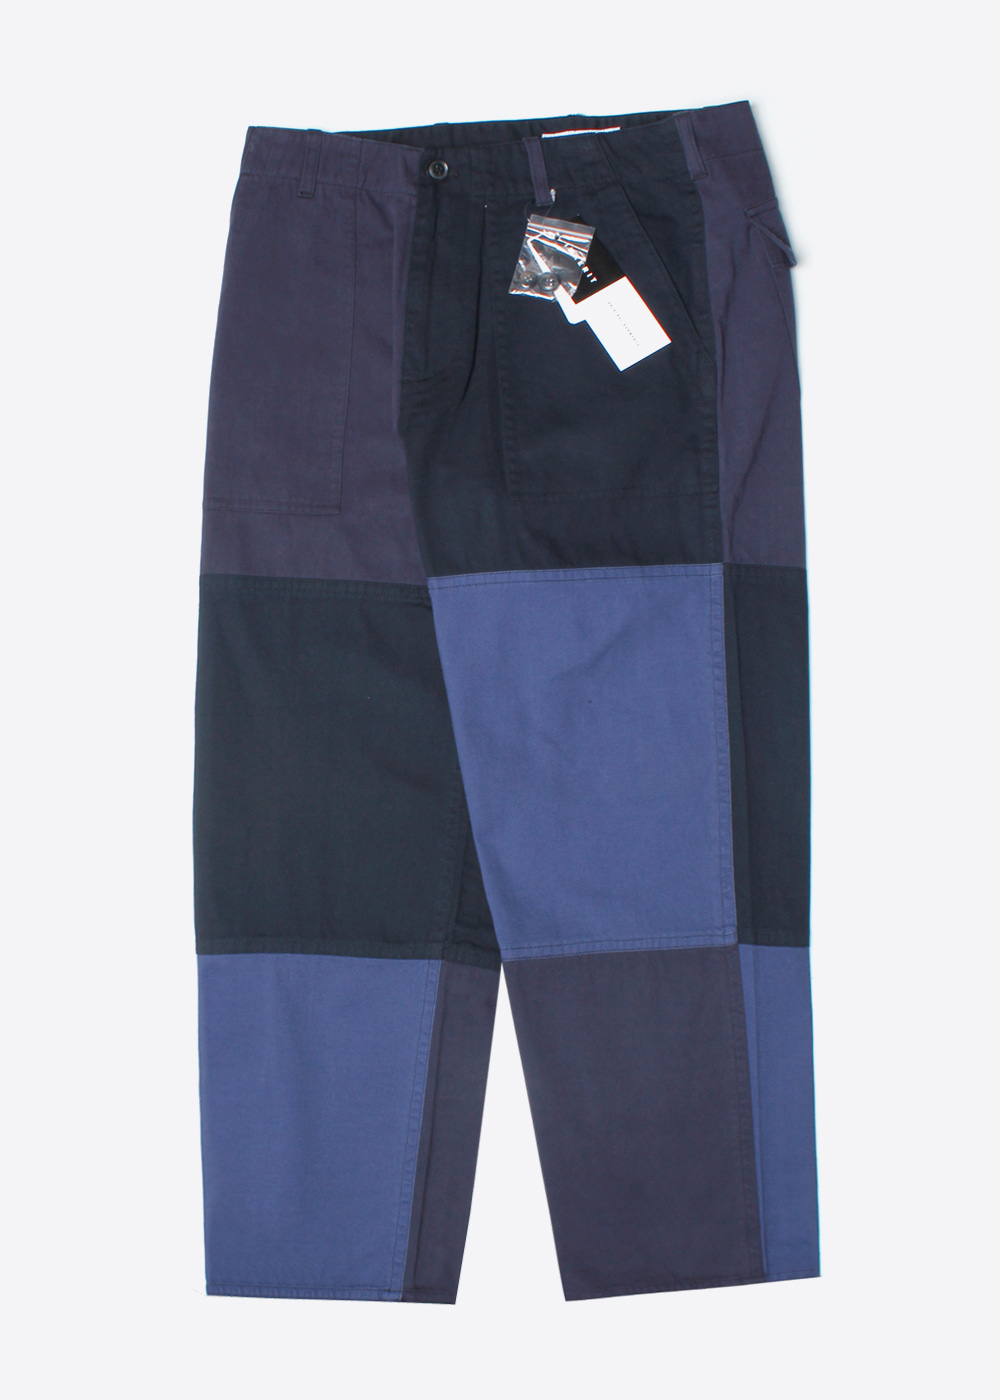 INHERIT BY JOURNAL STANDARD’relax fit’ cotton patchwork pant